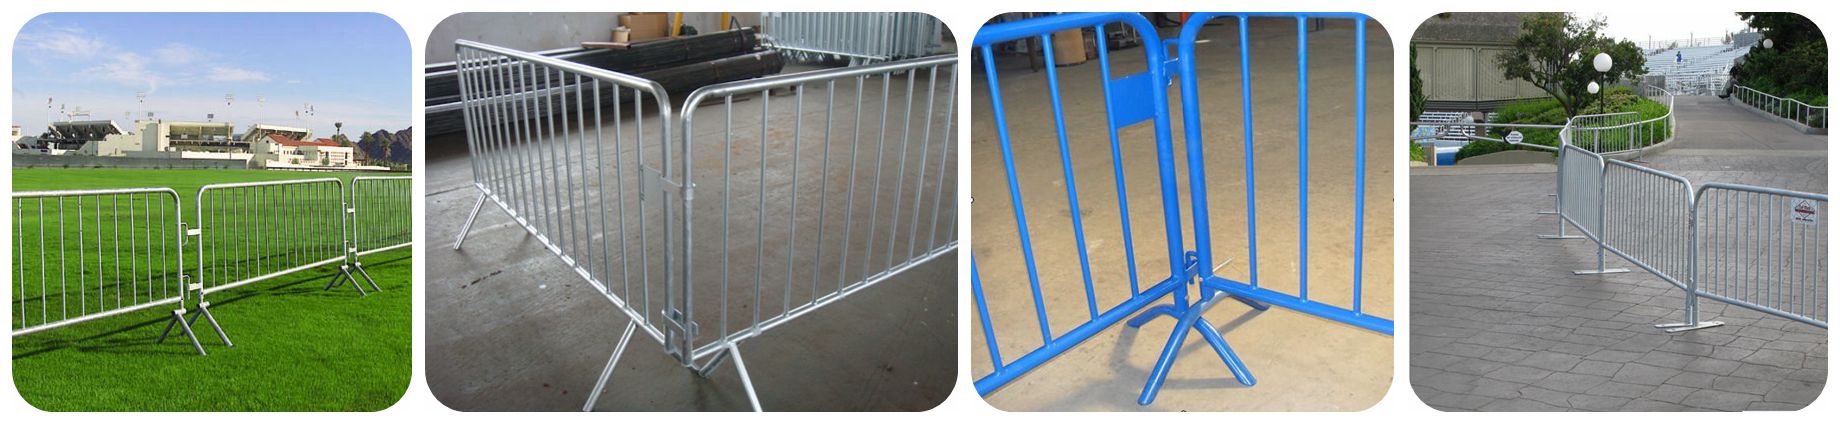 crowd control barrier installed on the construction site